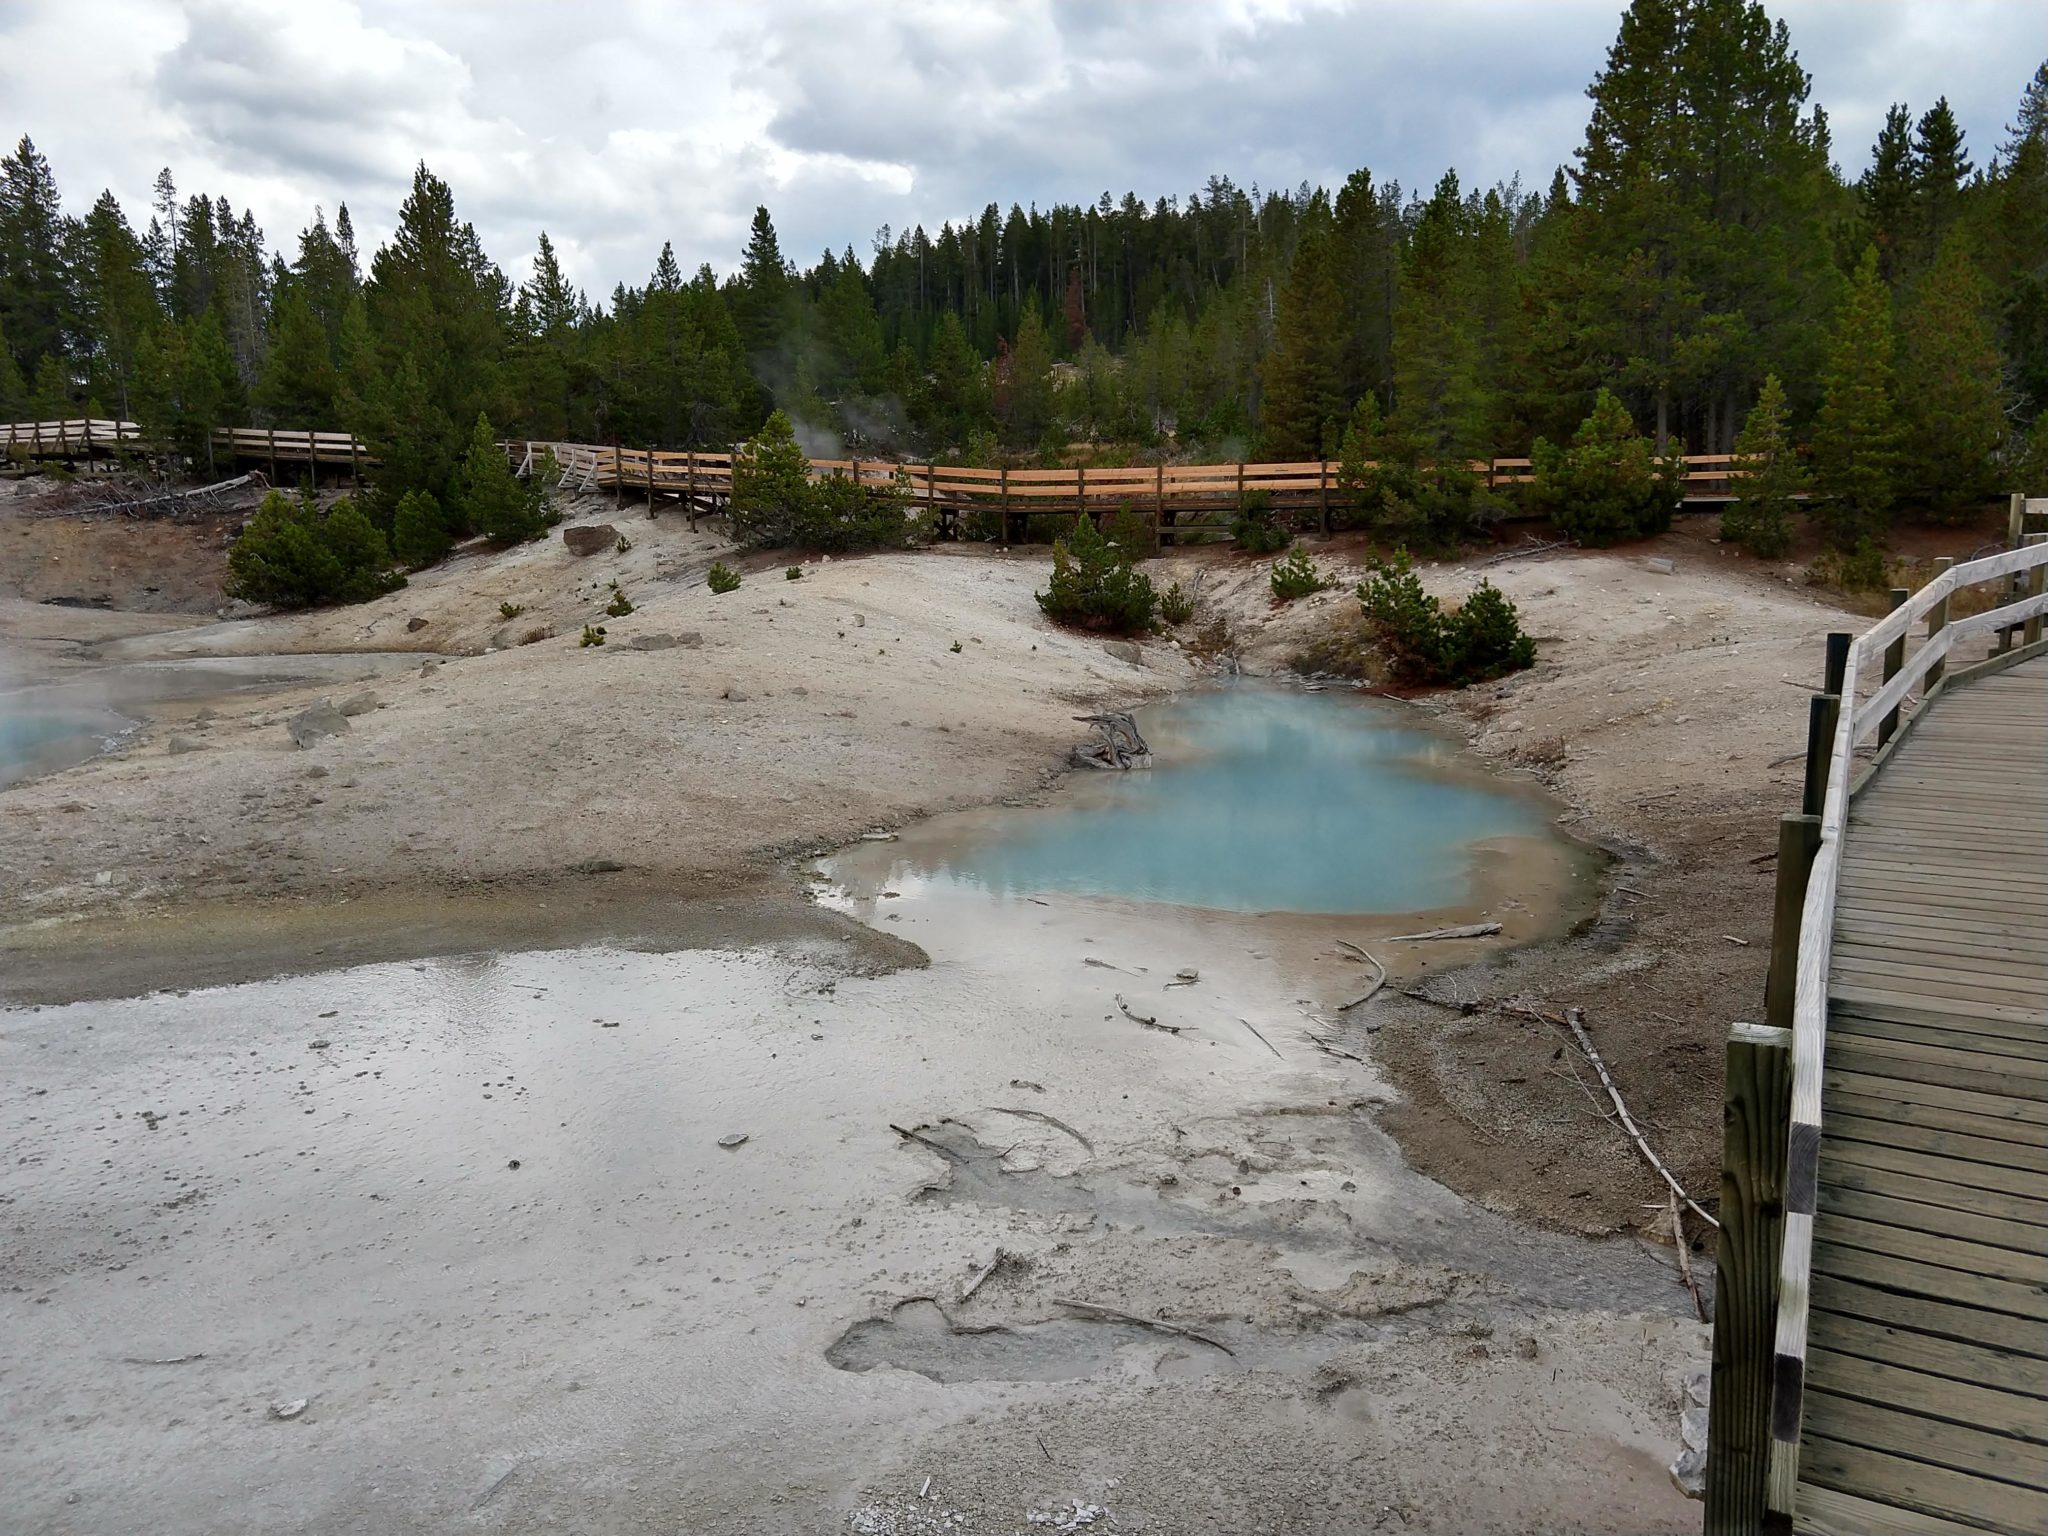 Hot Springs, Steam Vents, and Geysers Oh My!